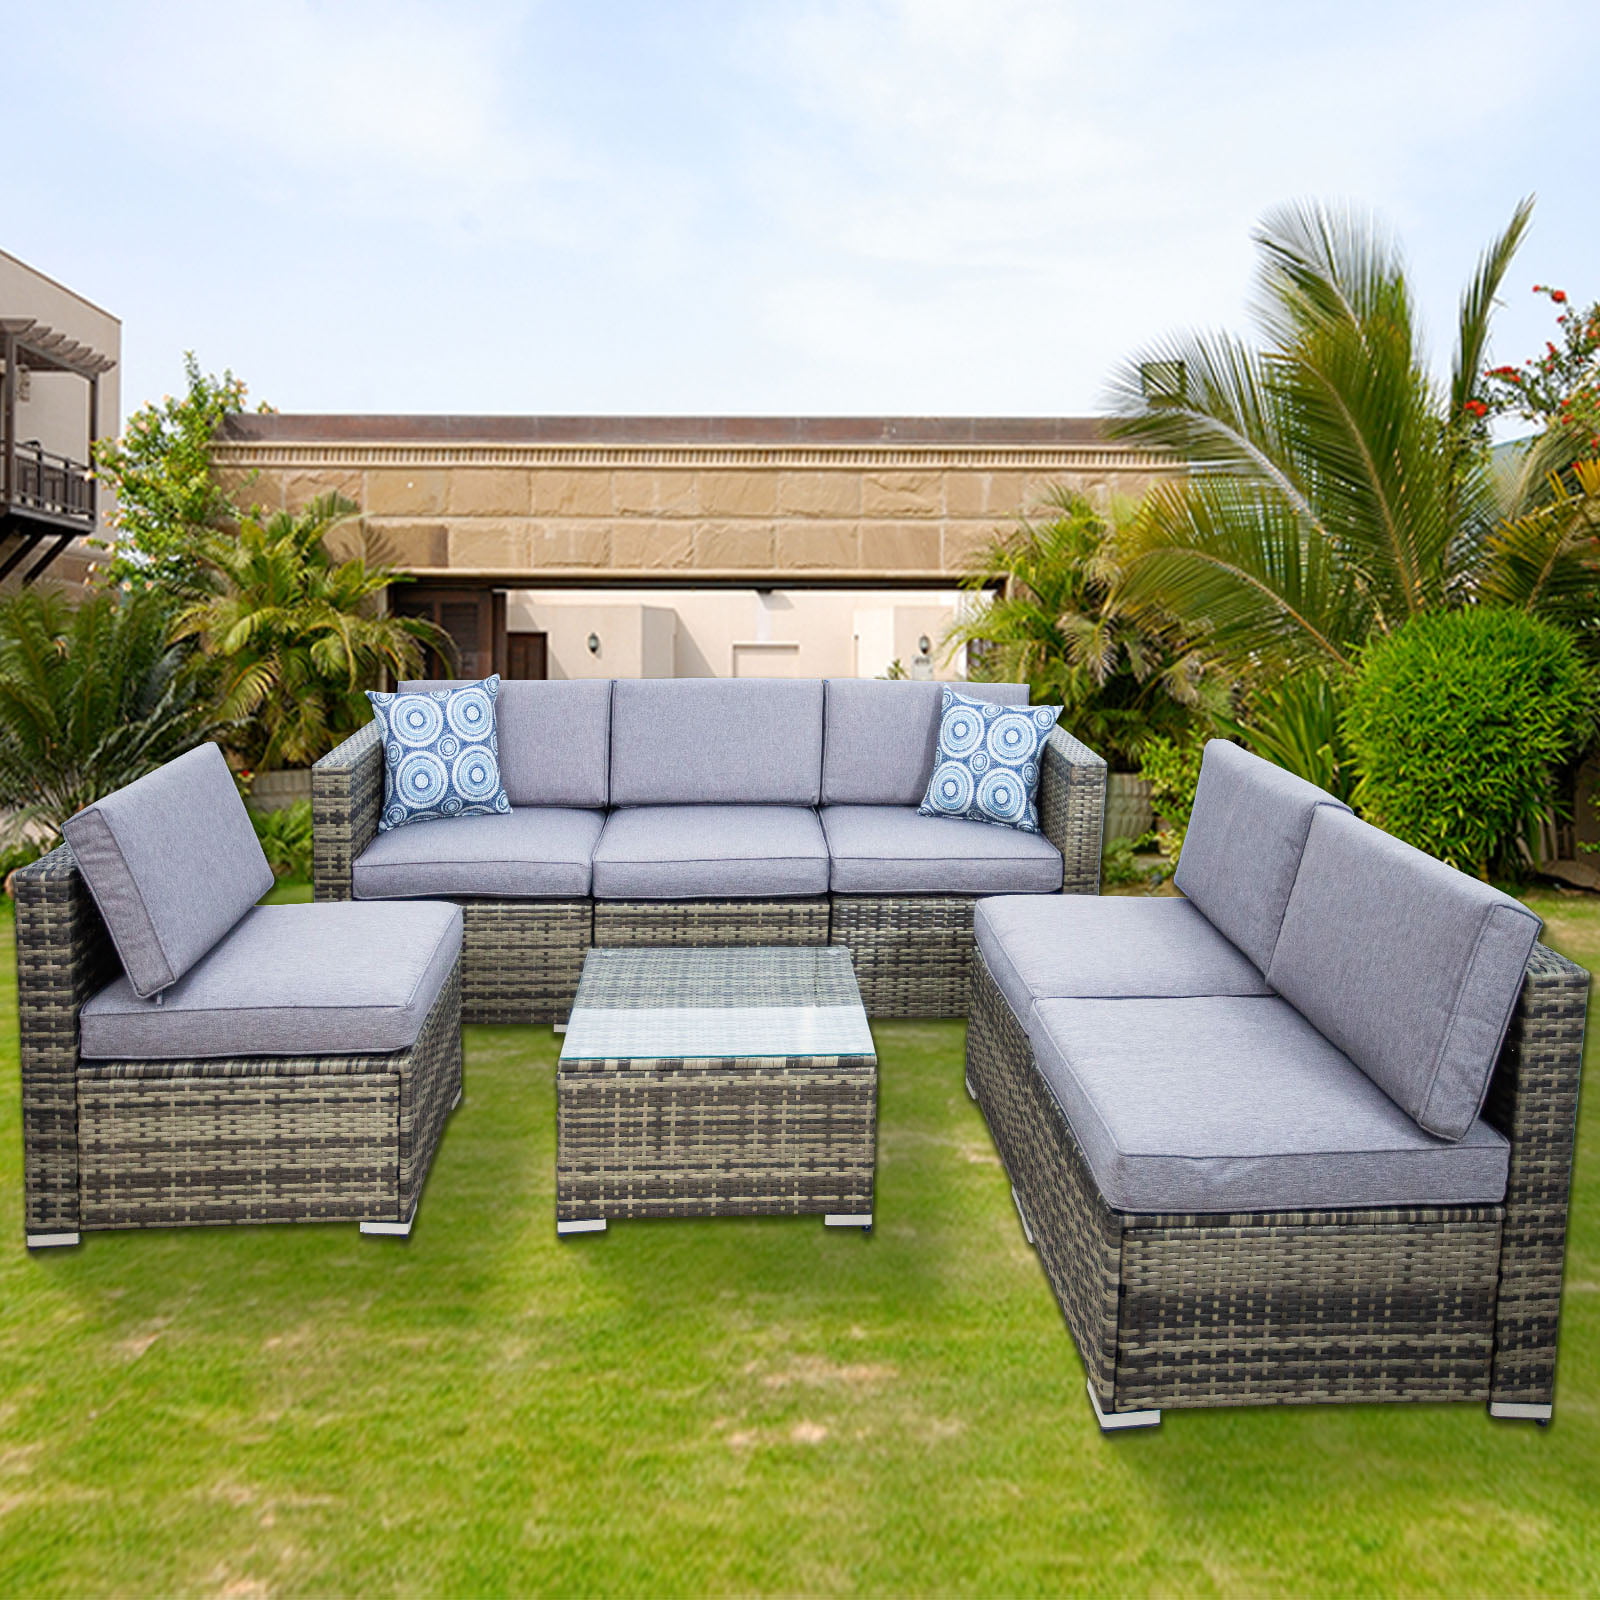 Sale > outdoor sectional clearance walmart > in stock